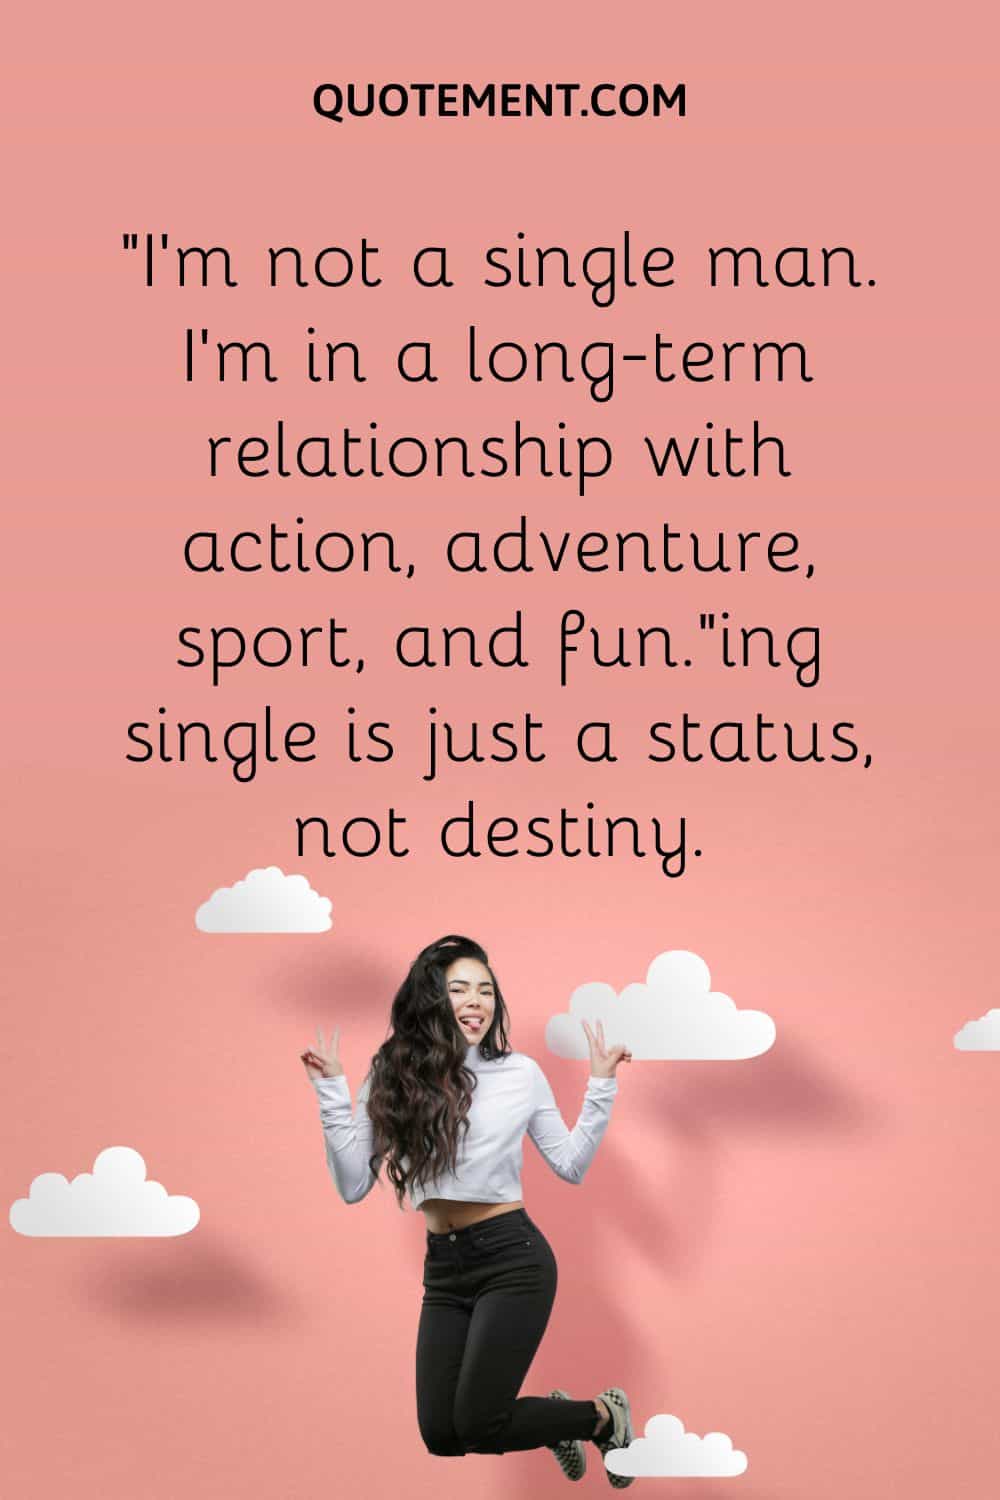 I’m not a single man. I’m in a long-term relationship with action, adventure, sport, and fun